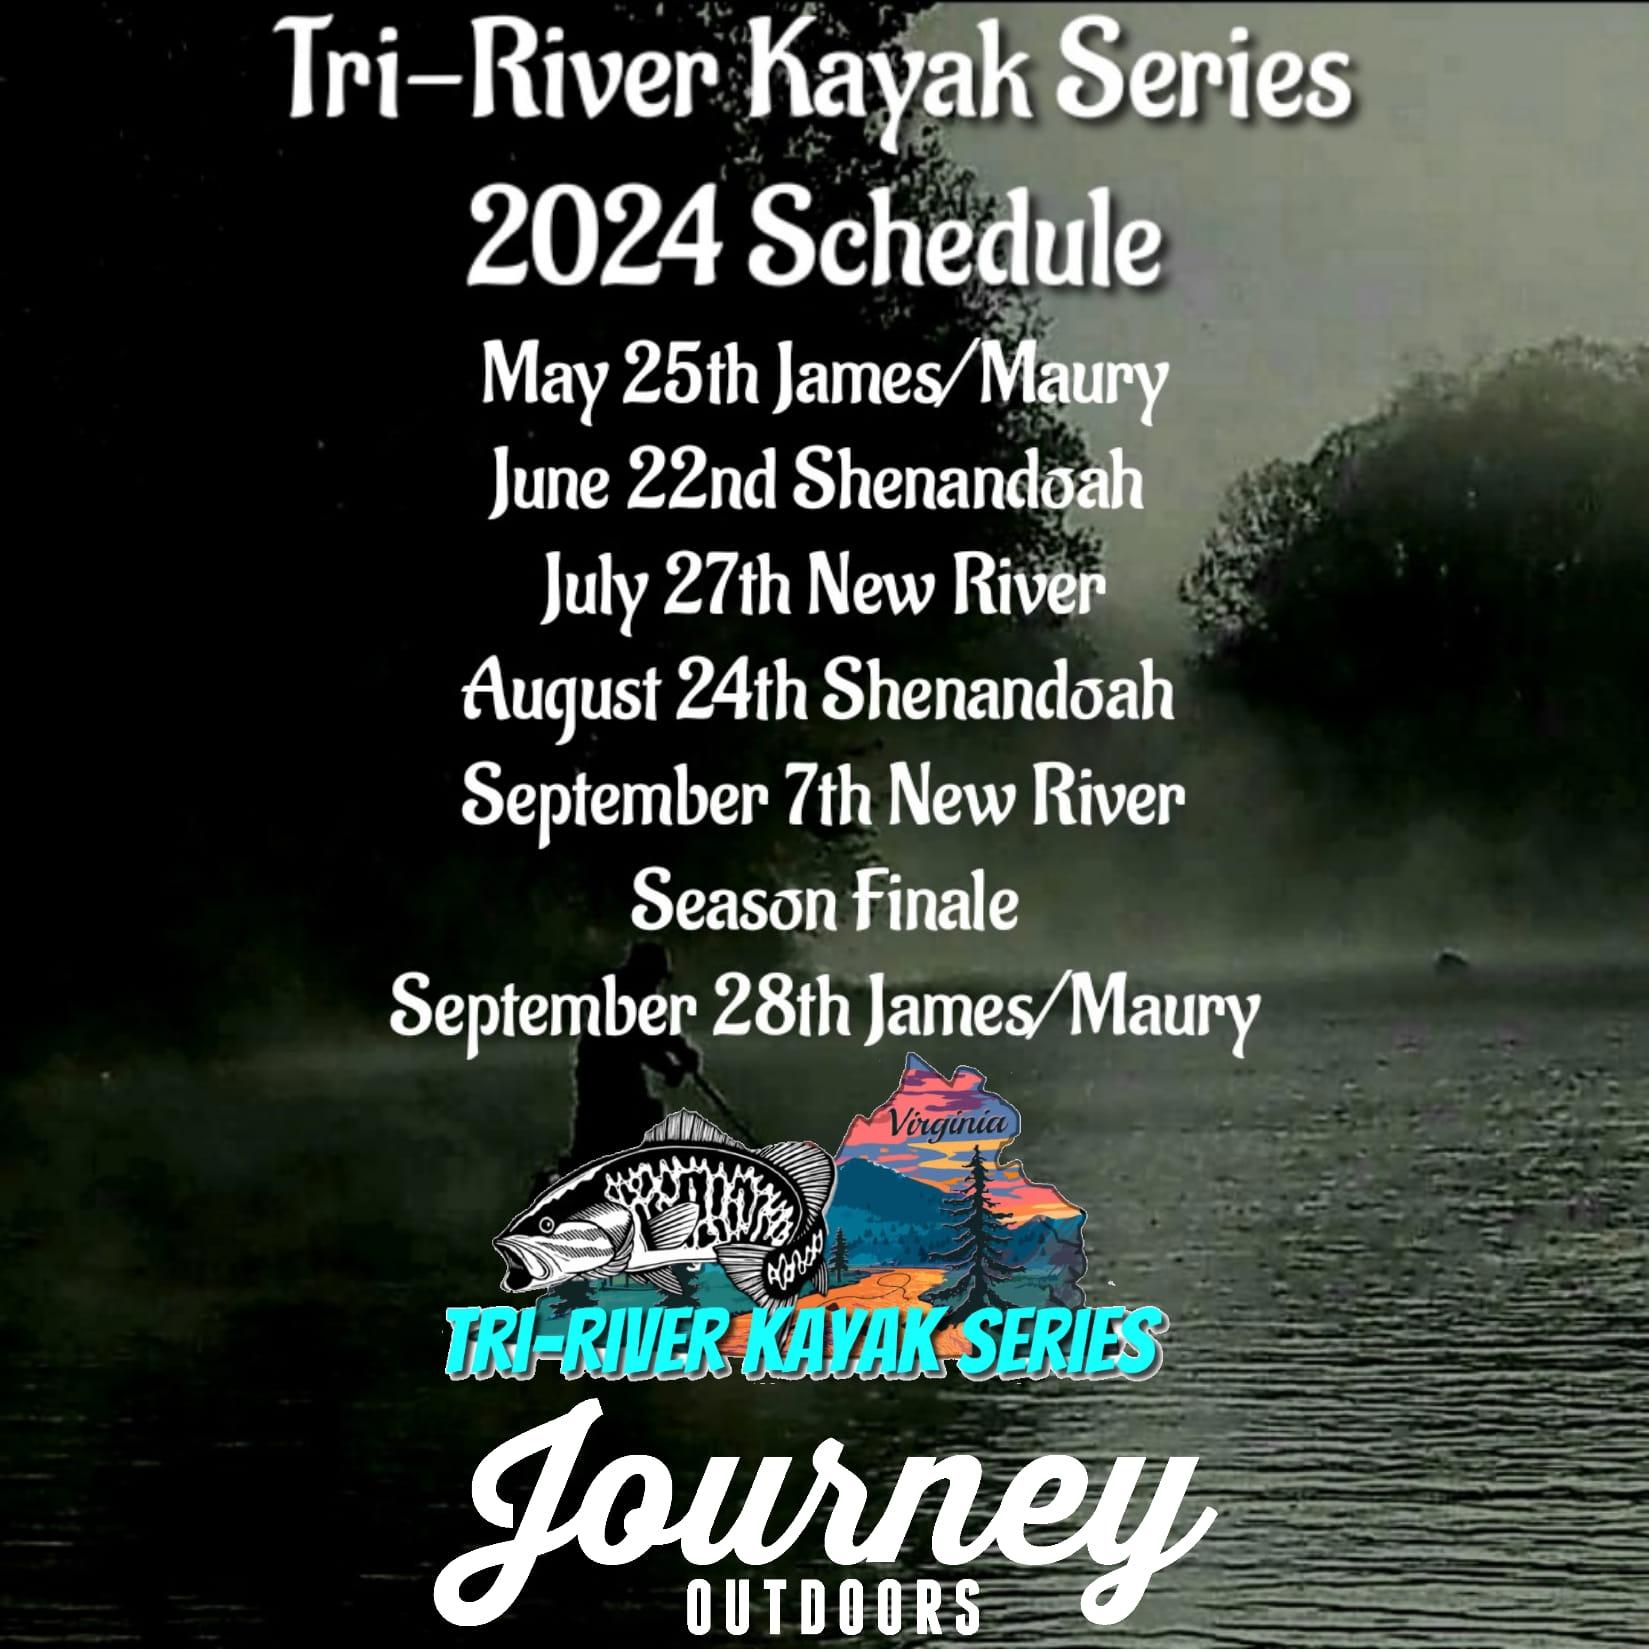 The 2024 schedule for TRKS